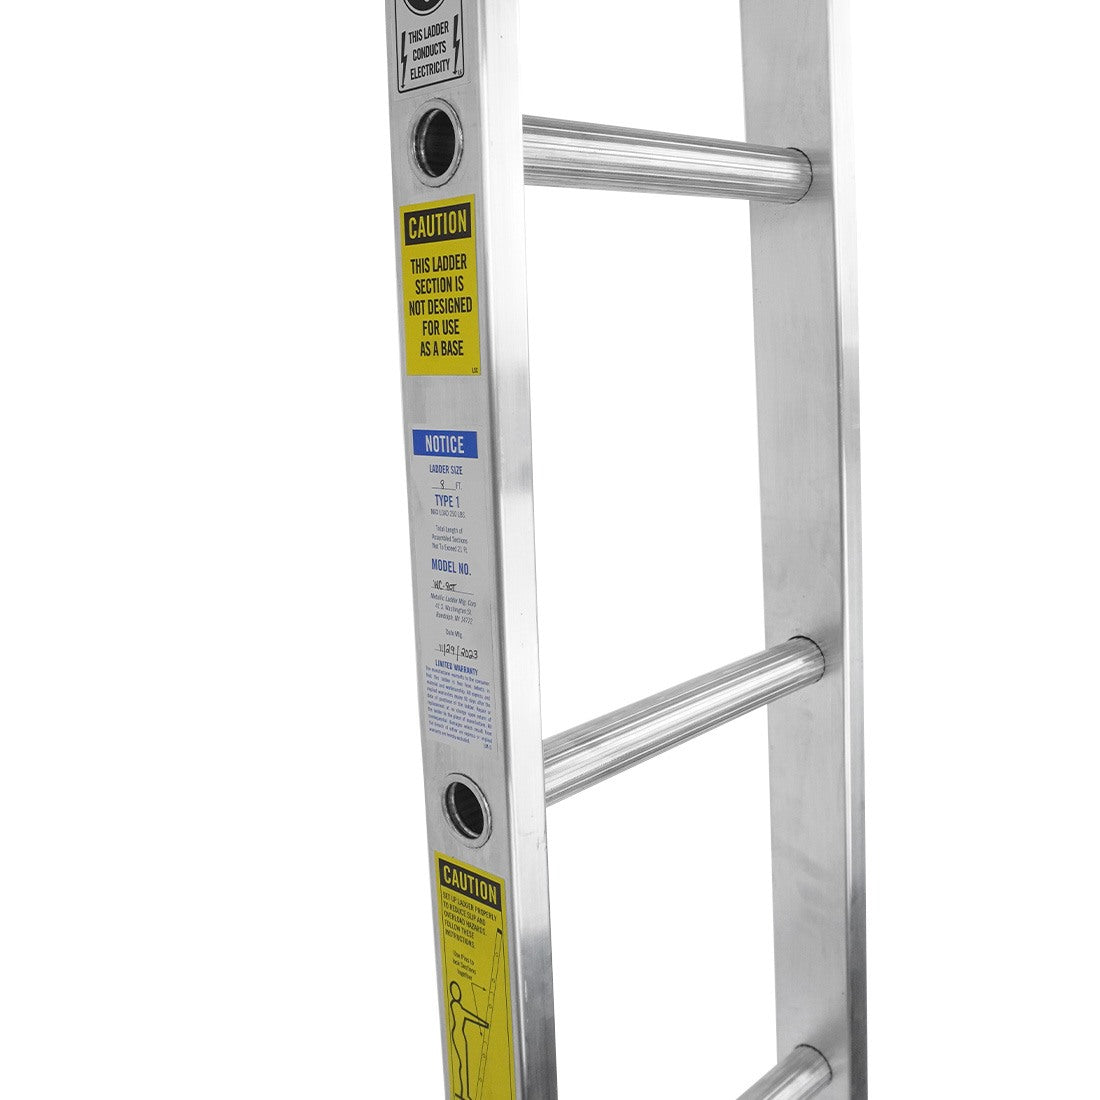 Metallic Ladder Aluminum Open Top Section - 8 Foot Left Angle View